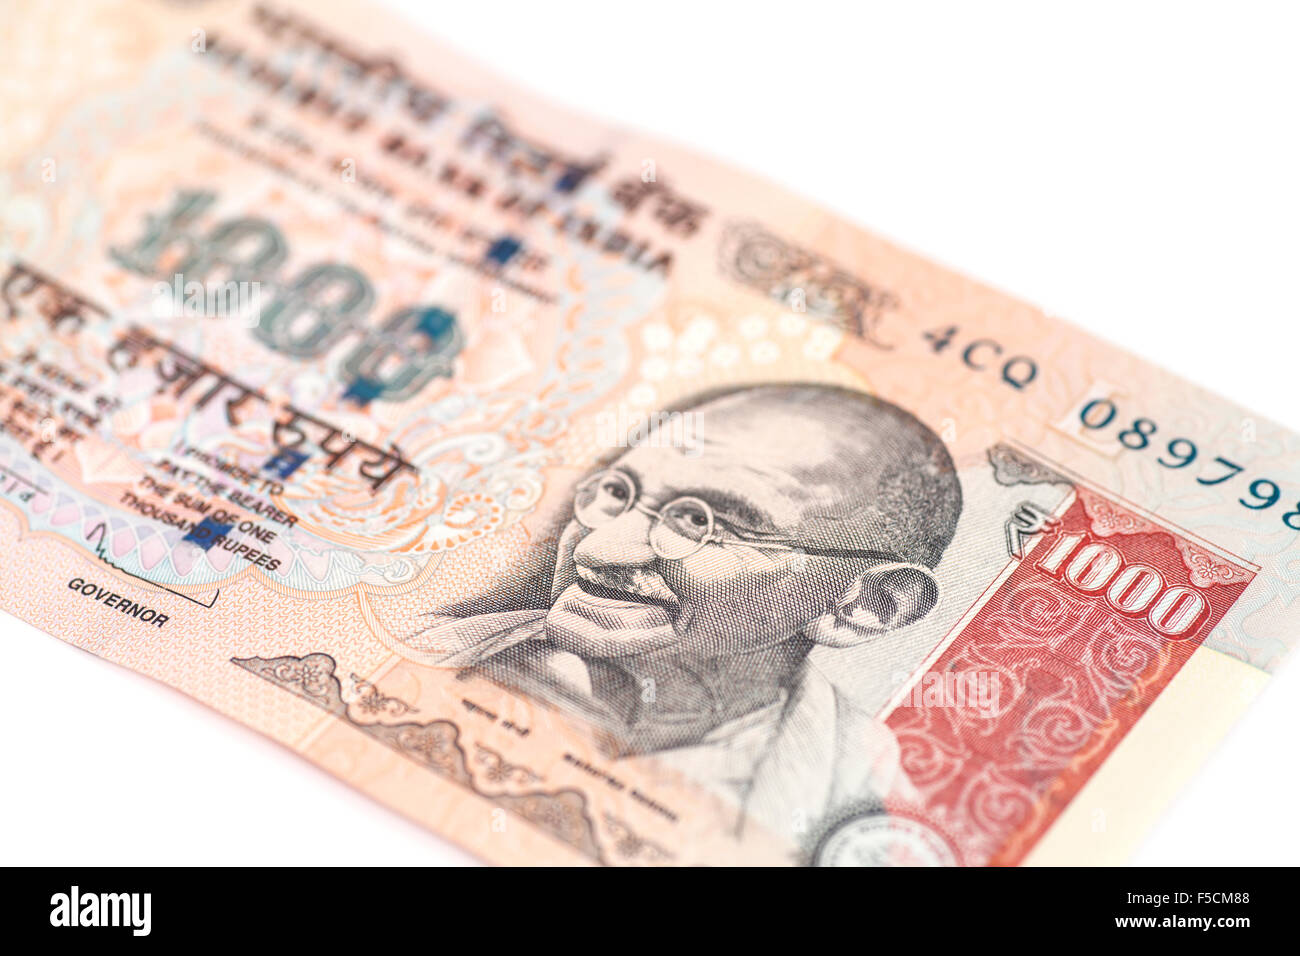 One thousand rupee note (Indian Currency) isolated on a white background Stock Photo